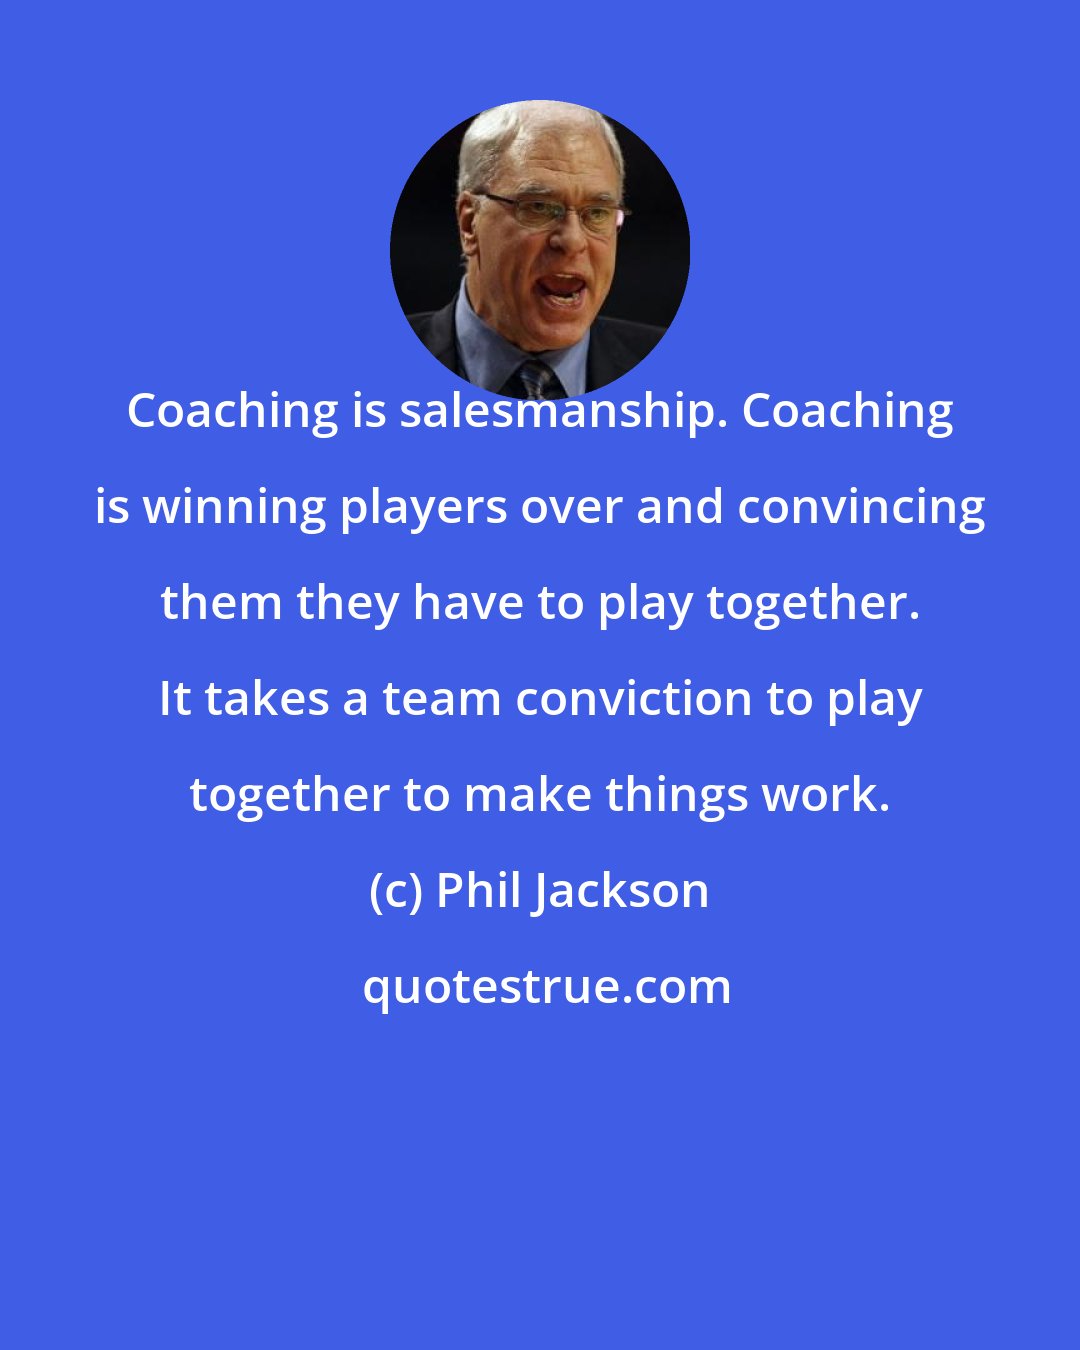 Phil Jackson: Coaching is salesmanship. Coaching is winning players over and convincing them they have to play together. It takes a team conviction to play together to make things work.